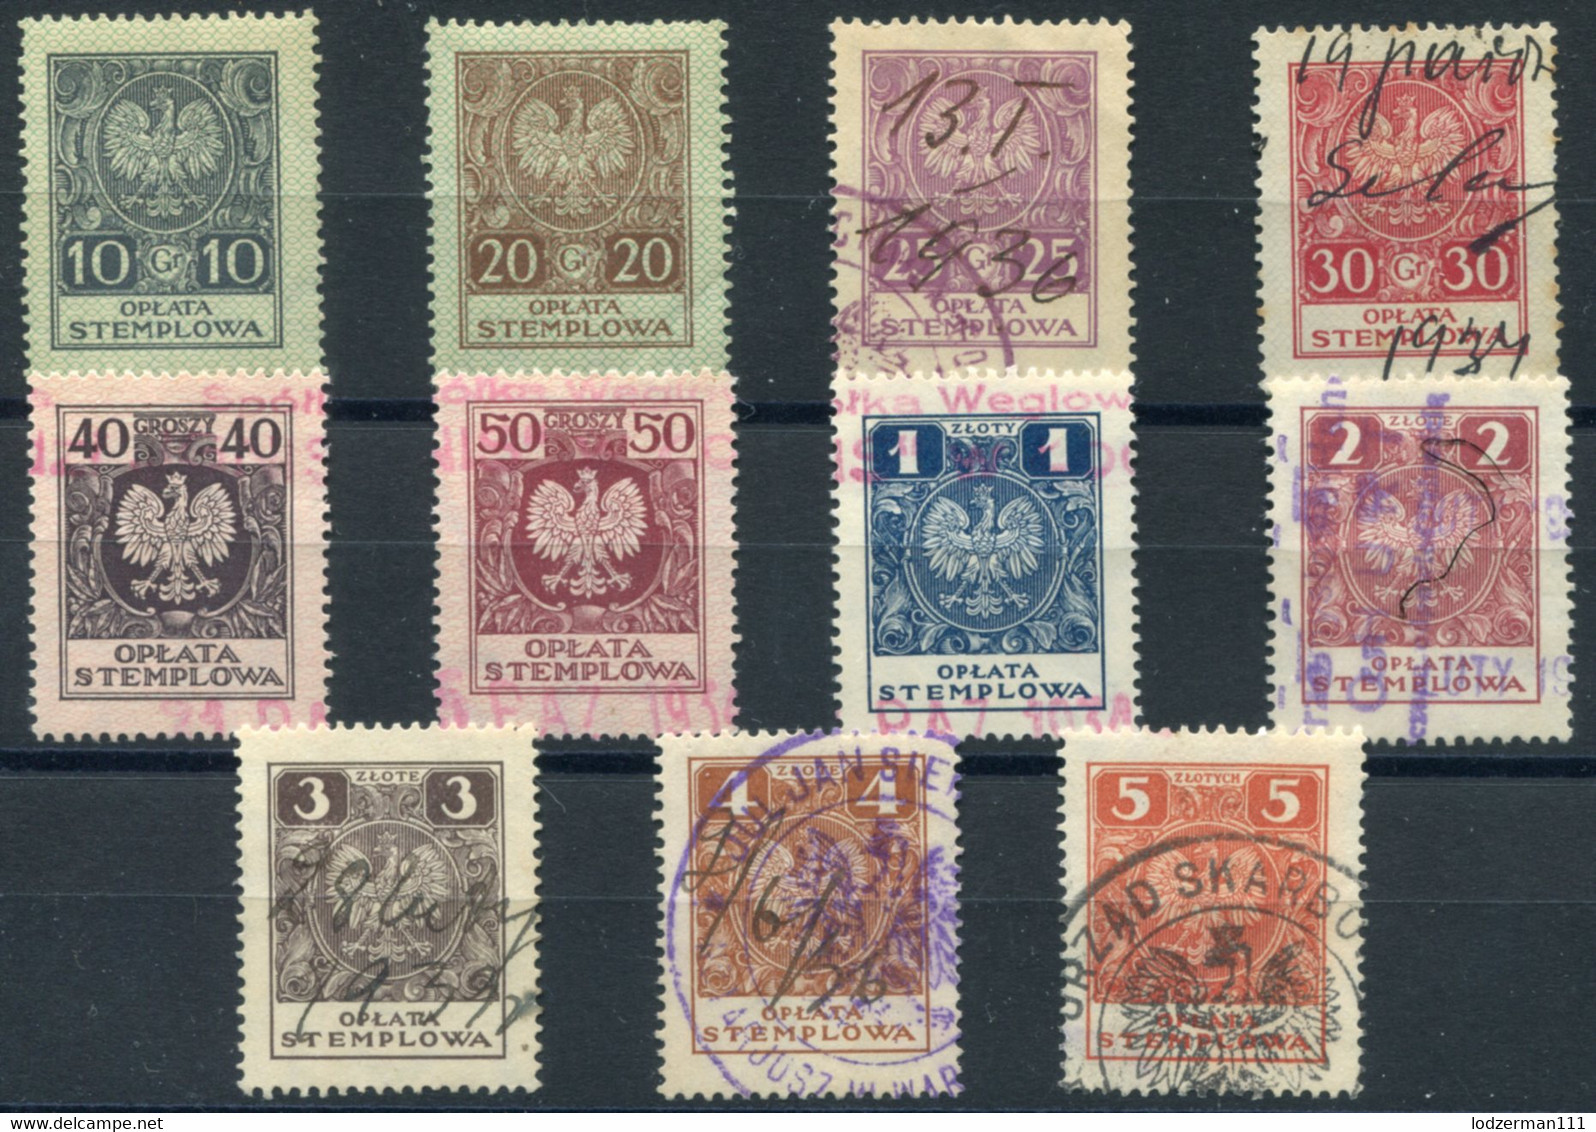 1932 General Zloty Issue #100-110 Compl. Set Used (2 MNH) All VF - Steuermarken